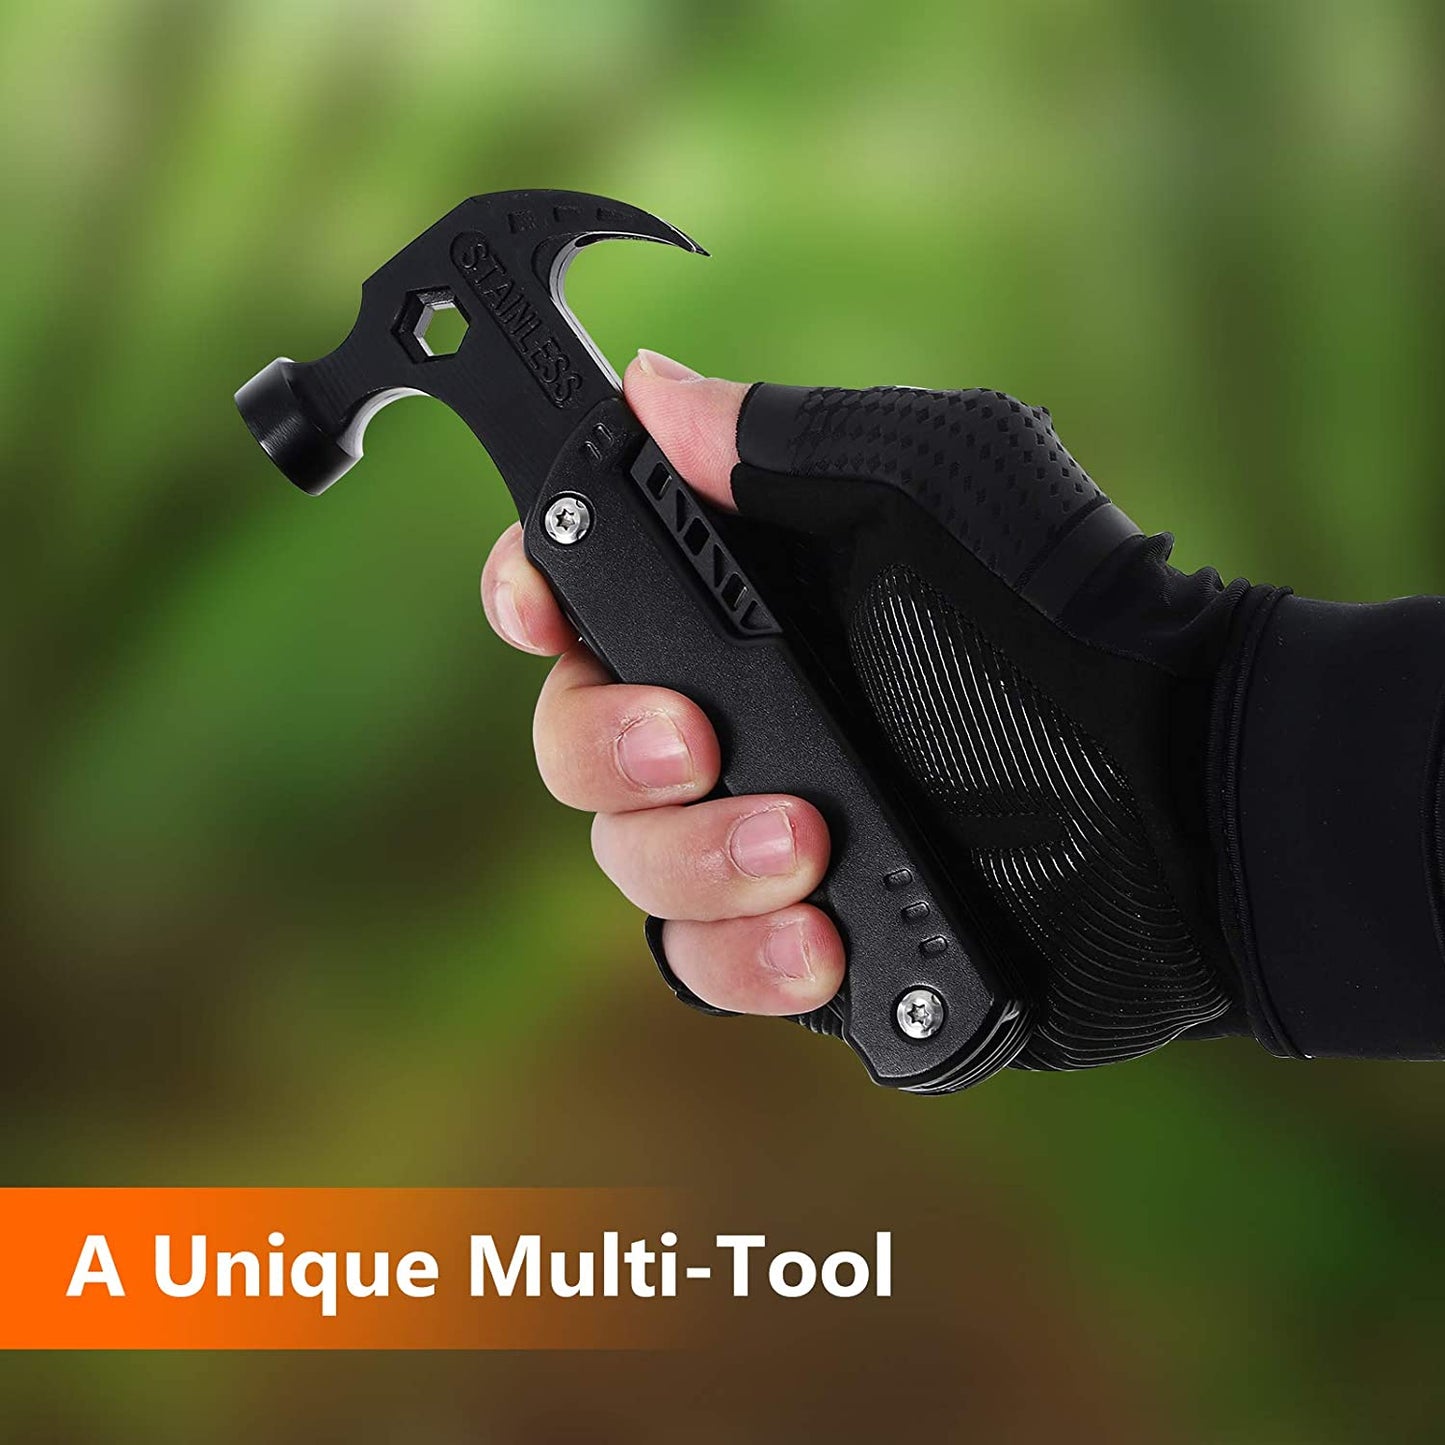 Multi-Function Hand Tool Claw Hammer